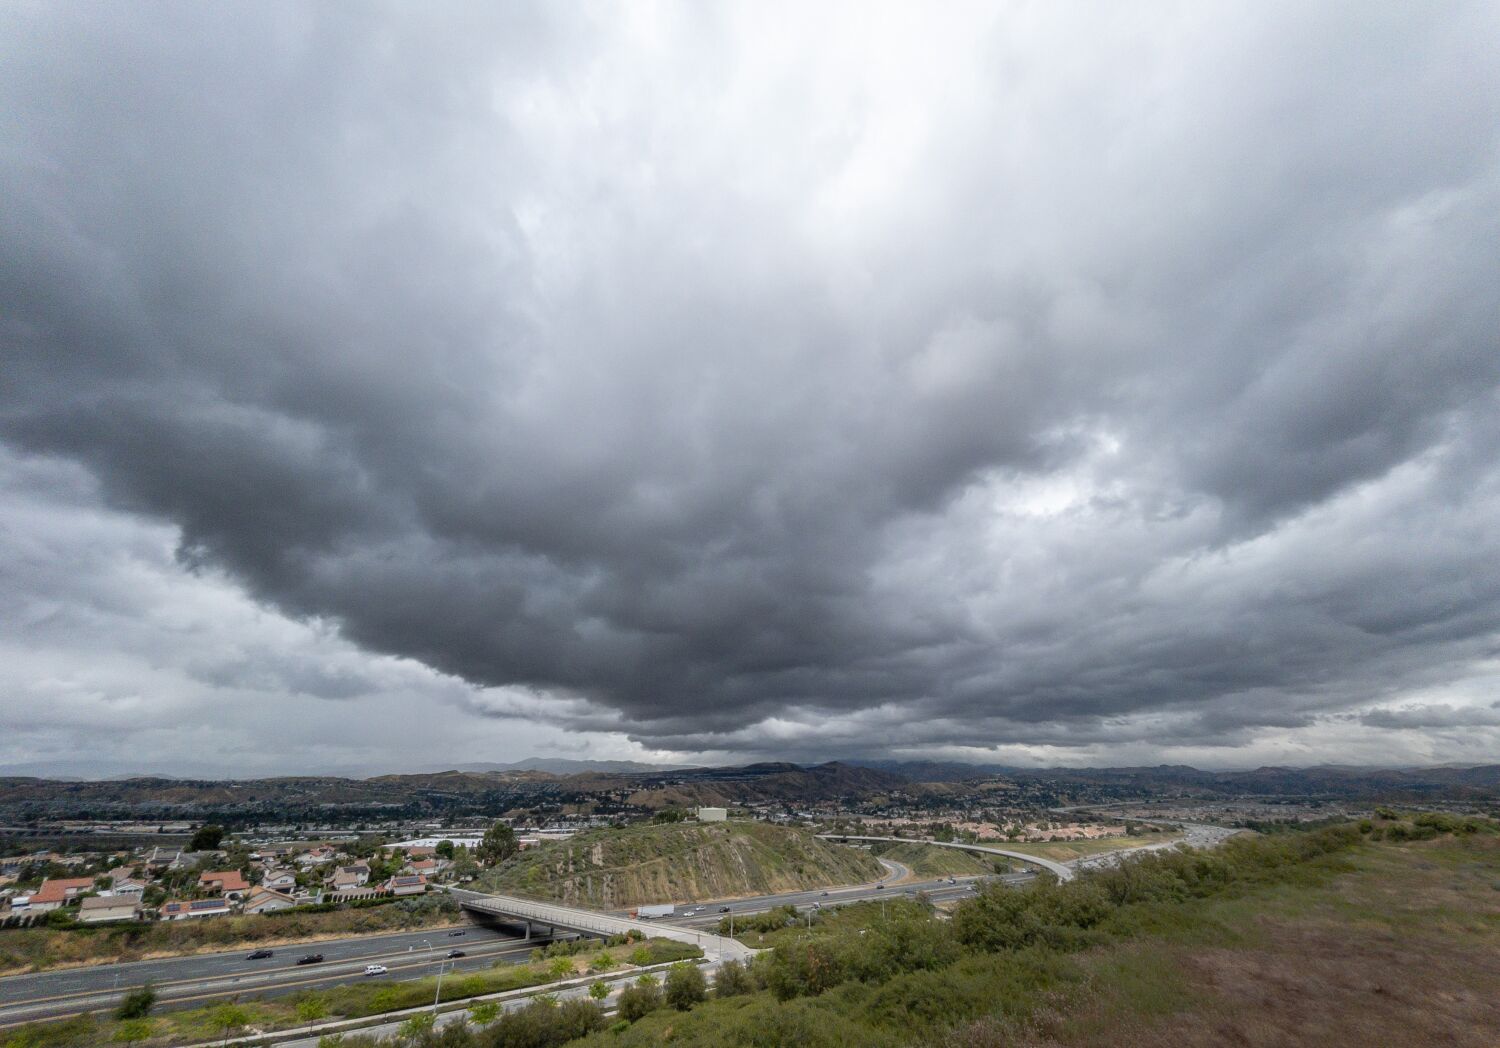 What causes the May gray that stubbornly blocks the sun for days in Southern California?